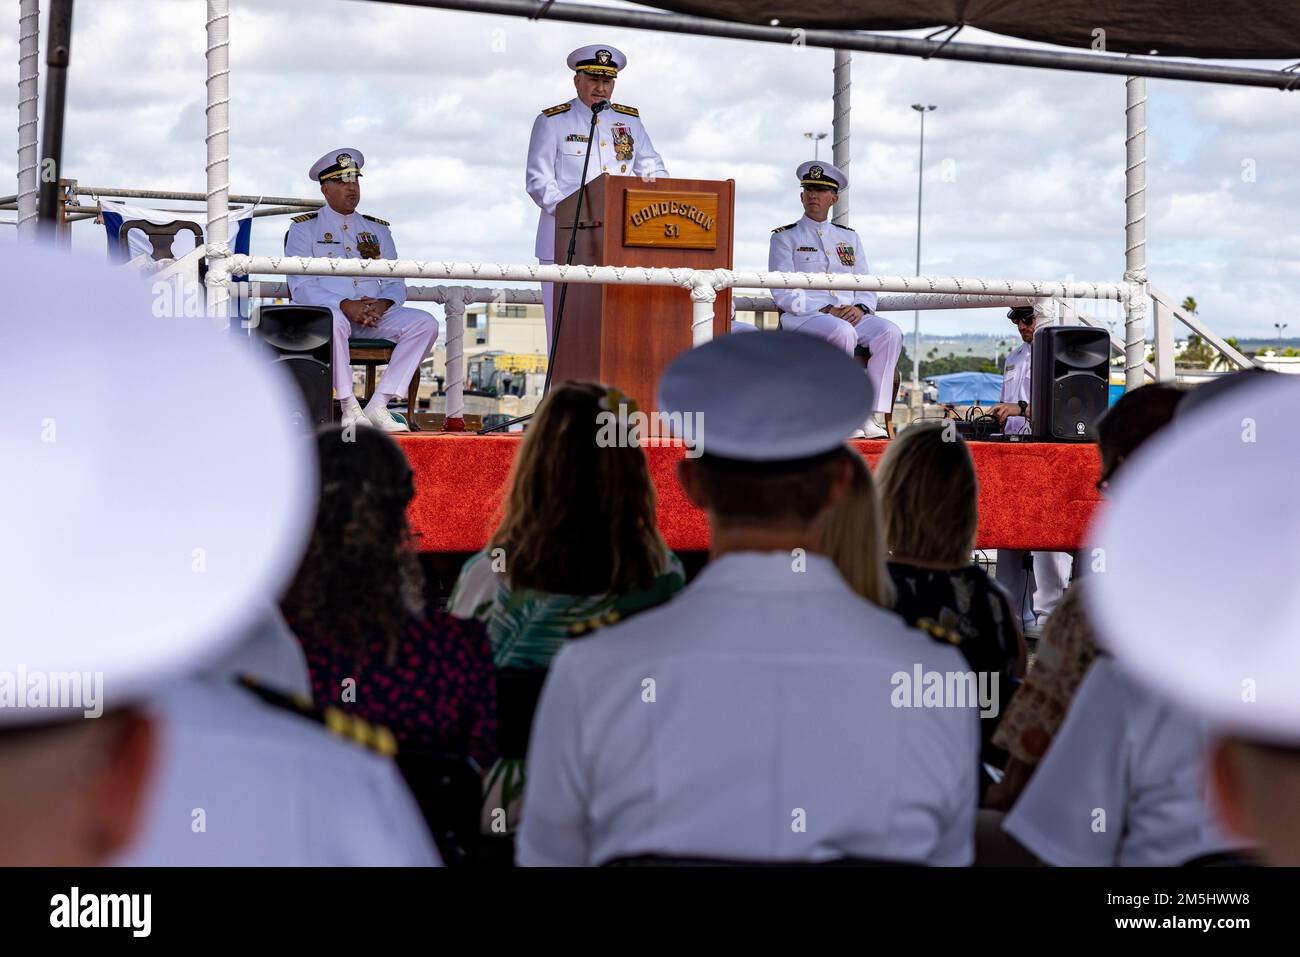 220318-N-OT701-1042 JOINT BASE PEARL HARBOR-HICKAM (Mar. 18, 2021) Rear Adm. Timothy Kott, Commander, Naval Surface Group Middle Pacific, speaks during a change of command ceremony. Capt. Ken Athans was relieved by Capt. Don Rauch as Commander, Destroyer Squadron 31 during the ceremony. Stock Photo